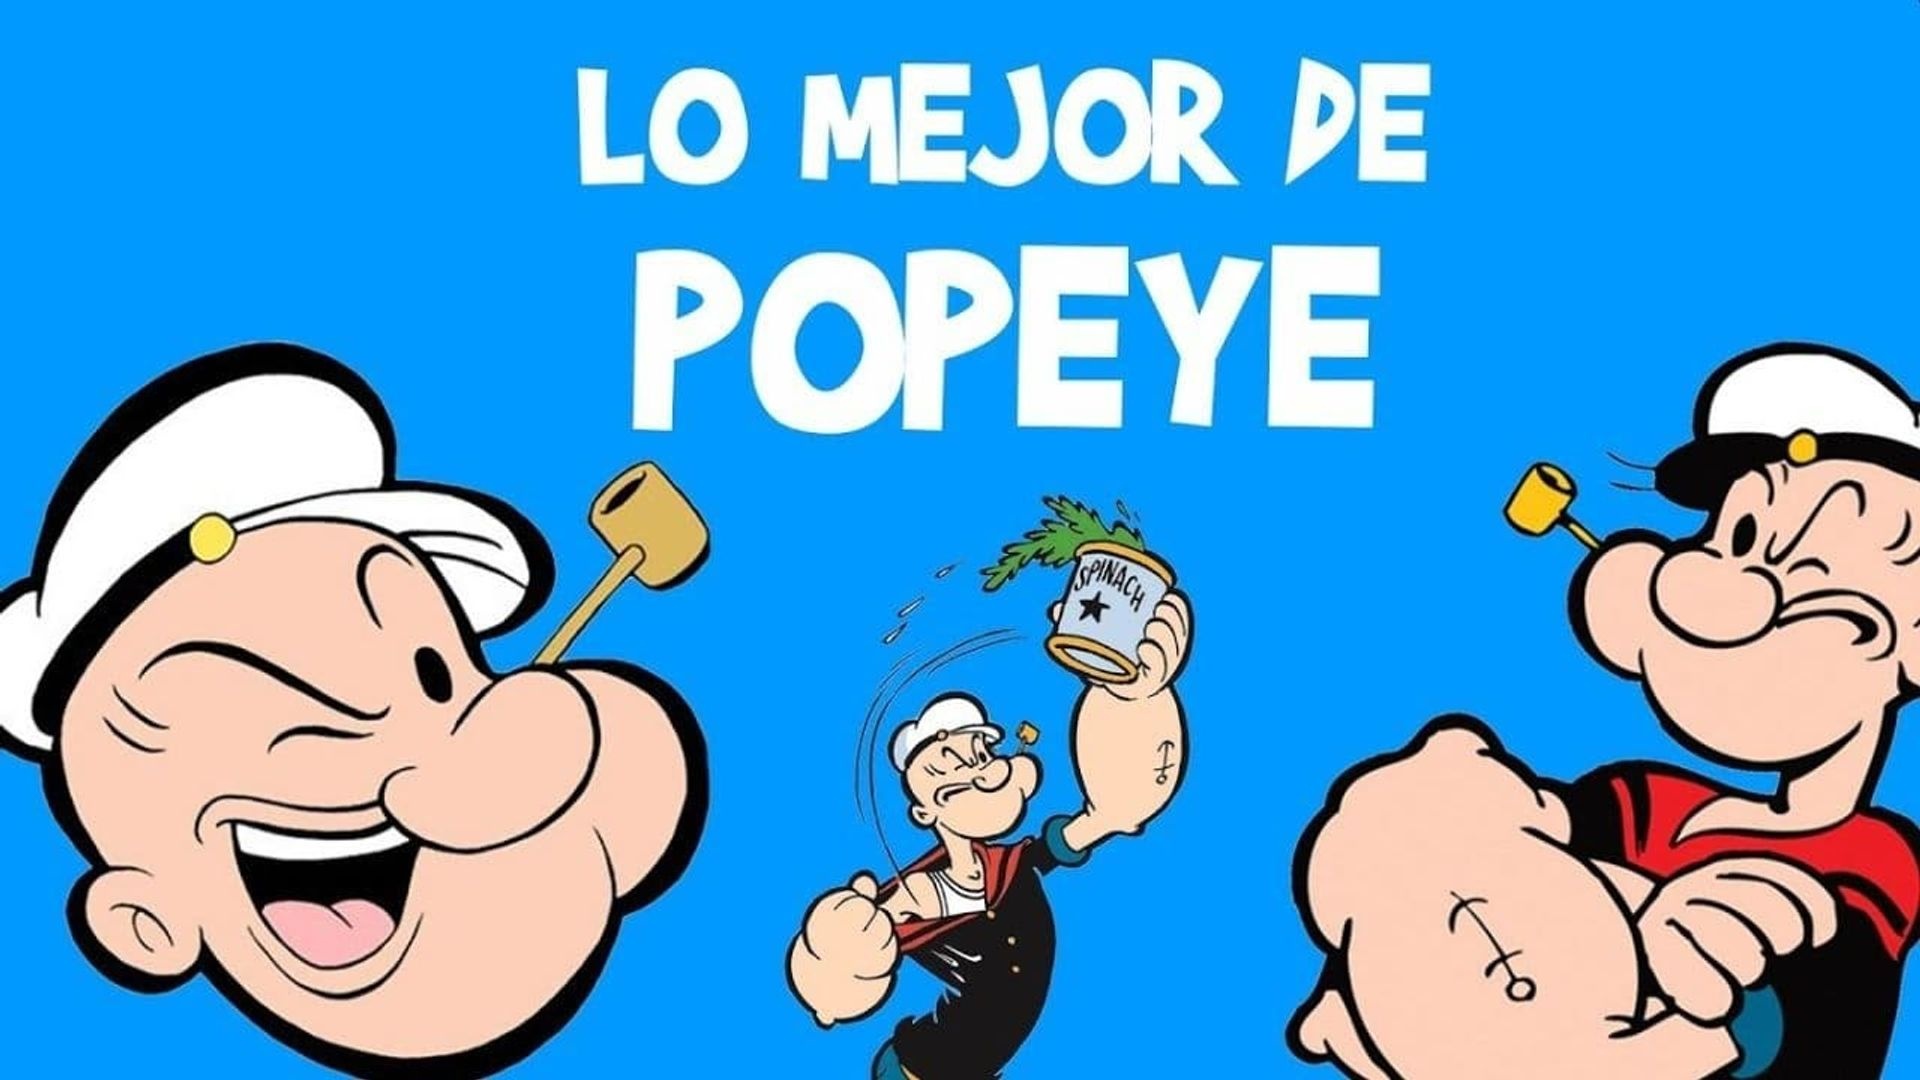 Popeye the Sailor Animation, Popeye the Sailor, Watch episodes, Streaming online, 1920x1080 Full HD Desktop